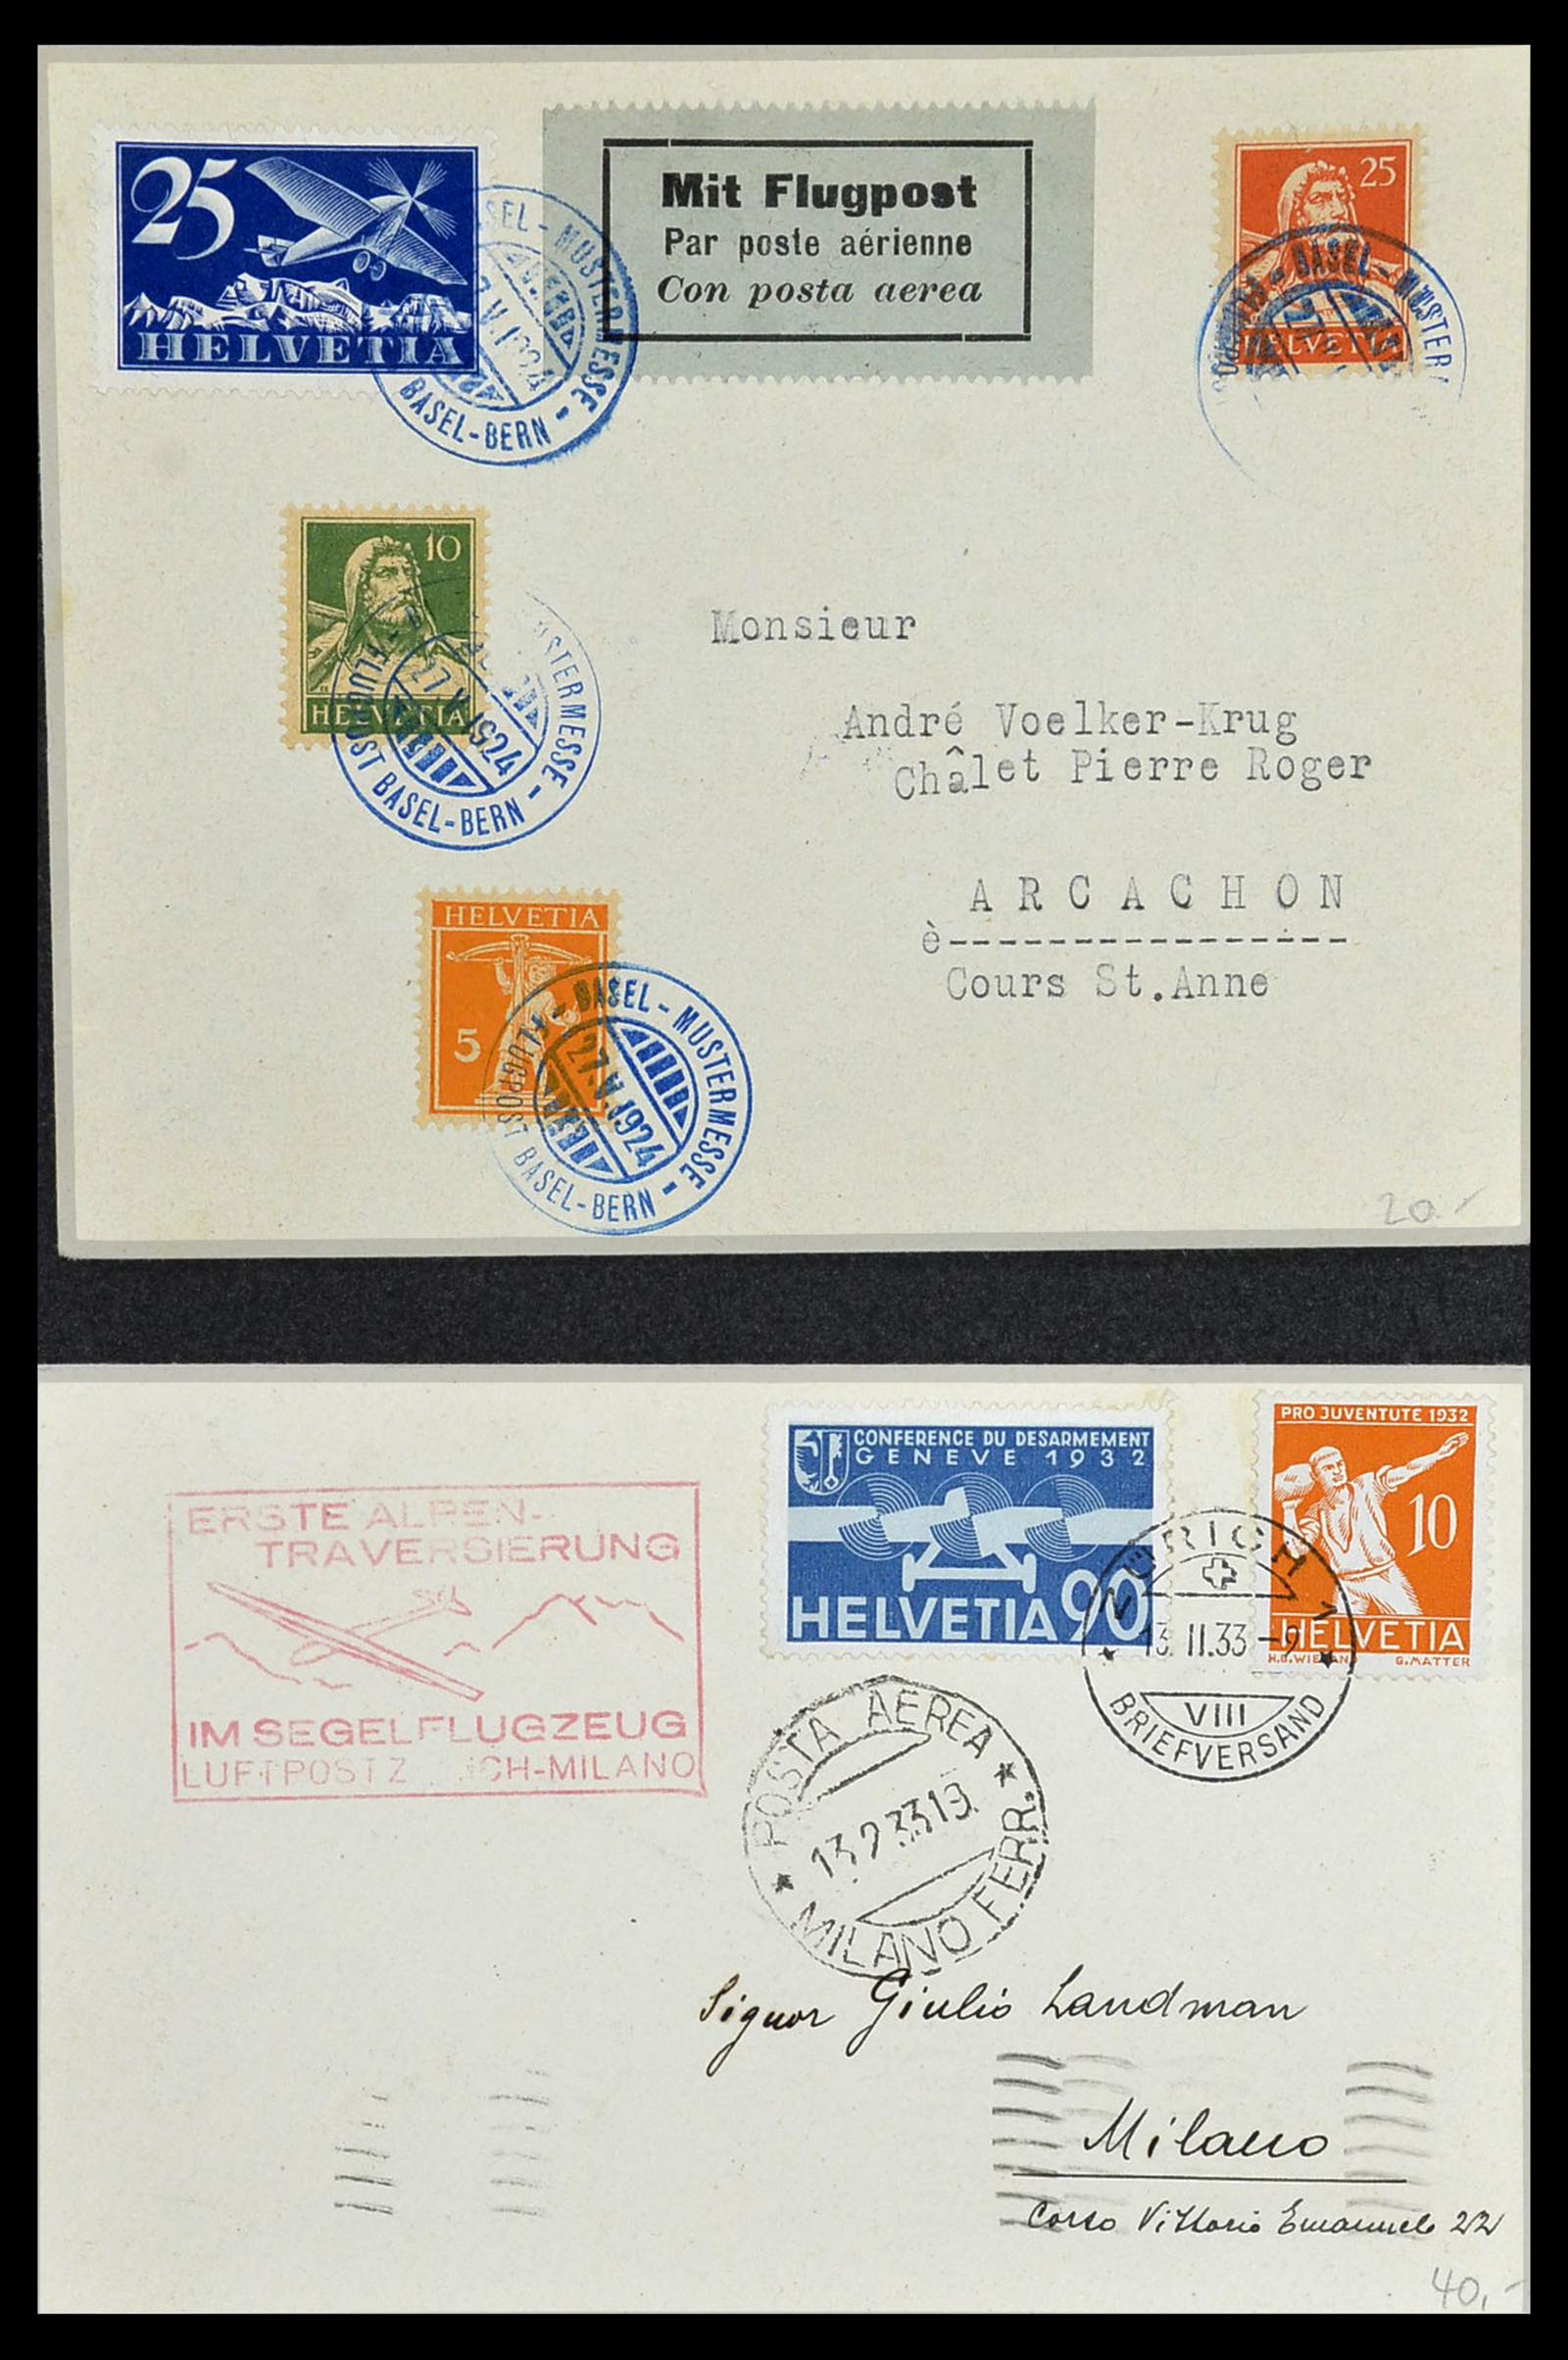 34141 098 - Stamp collection 34141 Switzerland airmail covers 1920-1960.